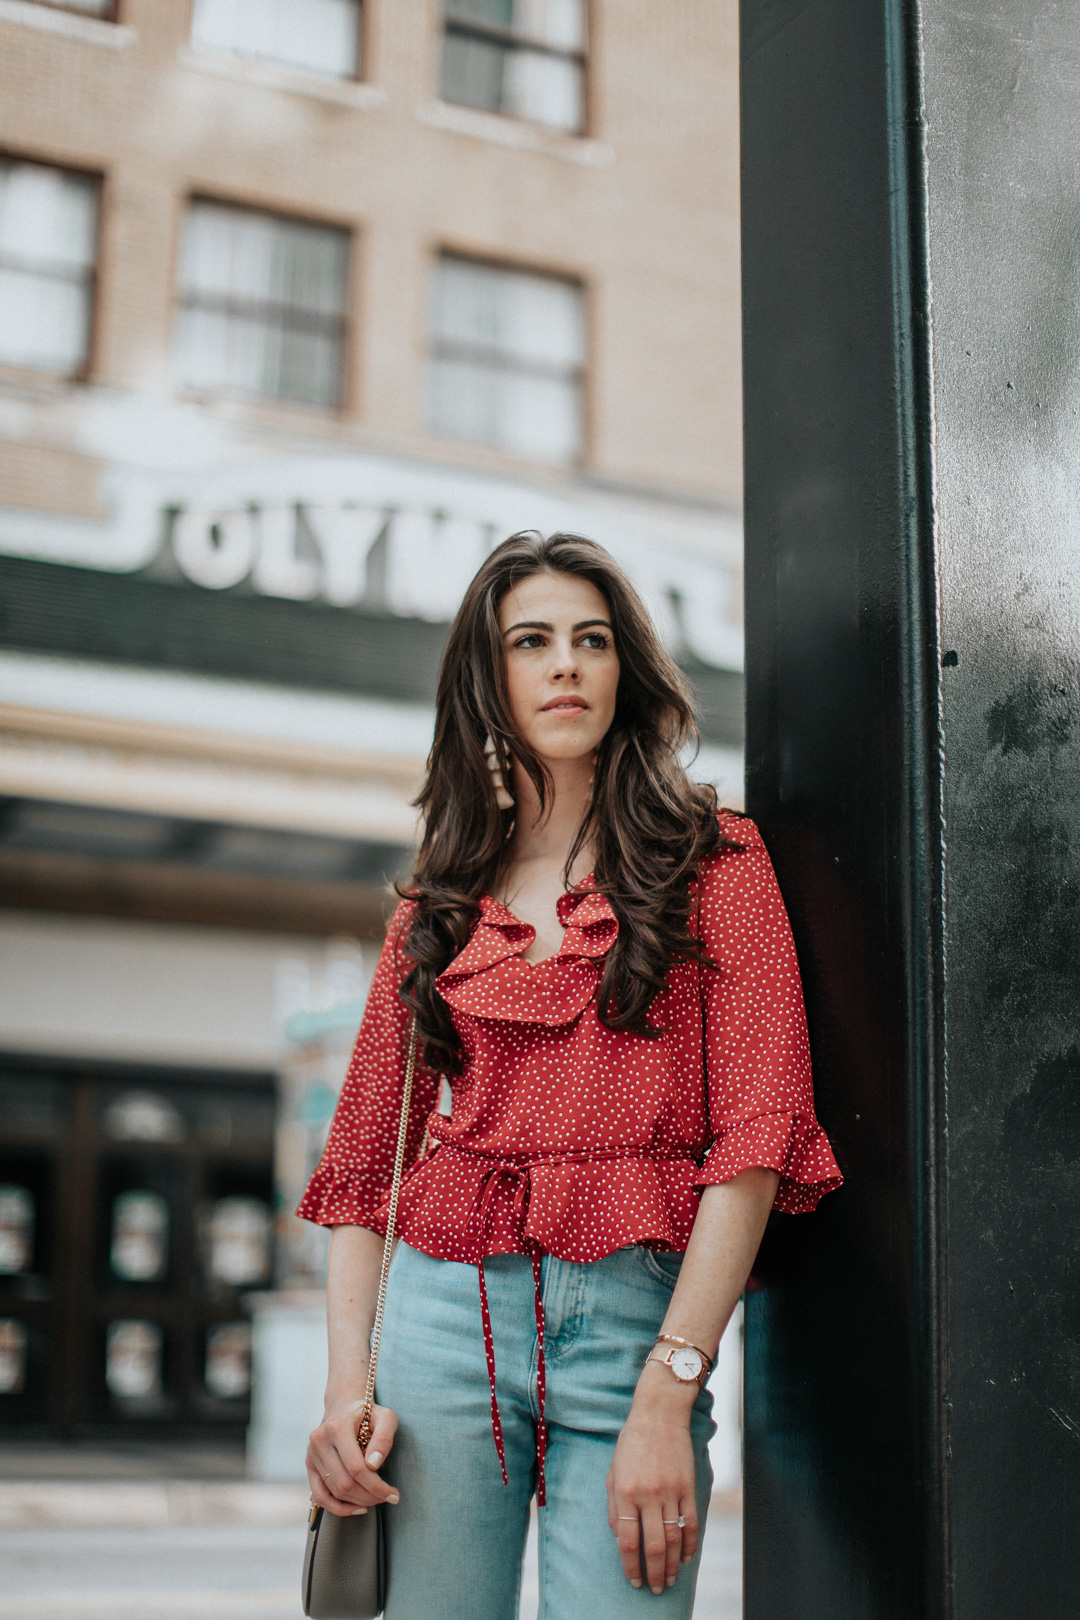 Jackie Roque styling a Frill toyshop look in Downtown Miami.